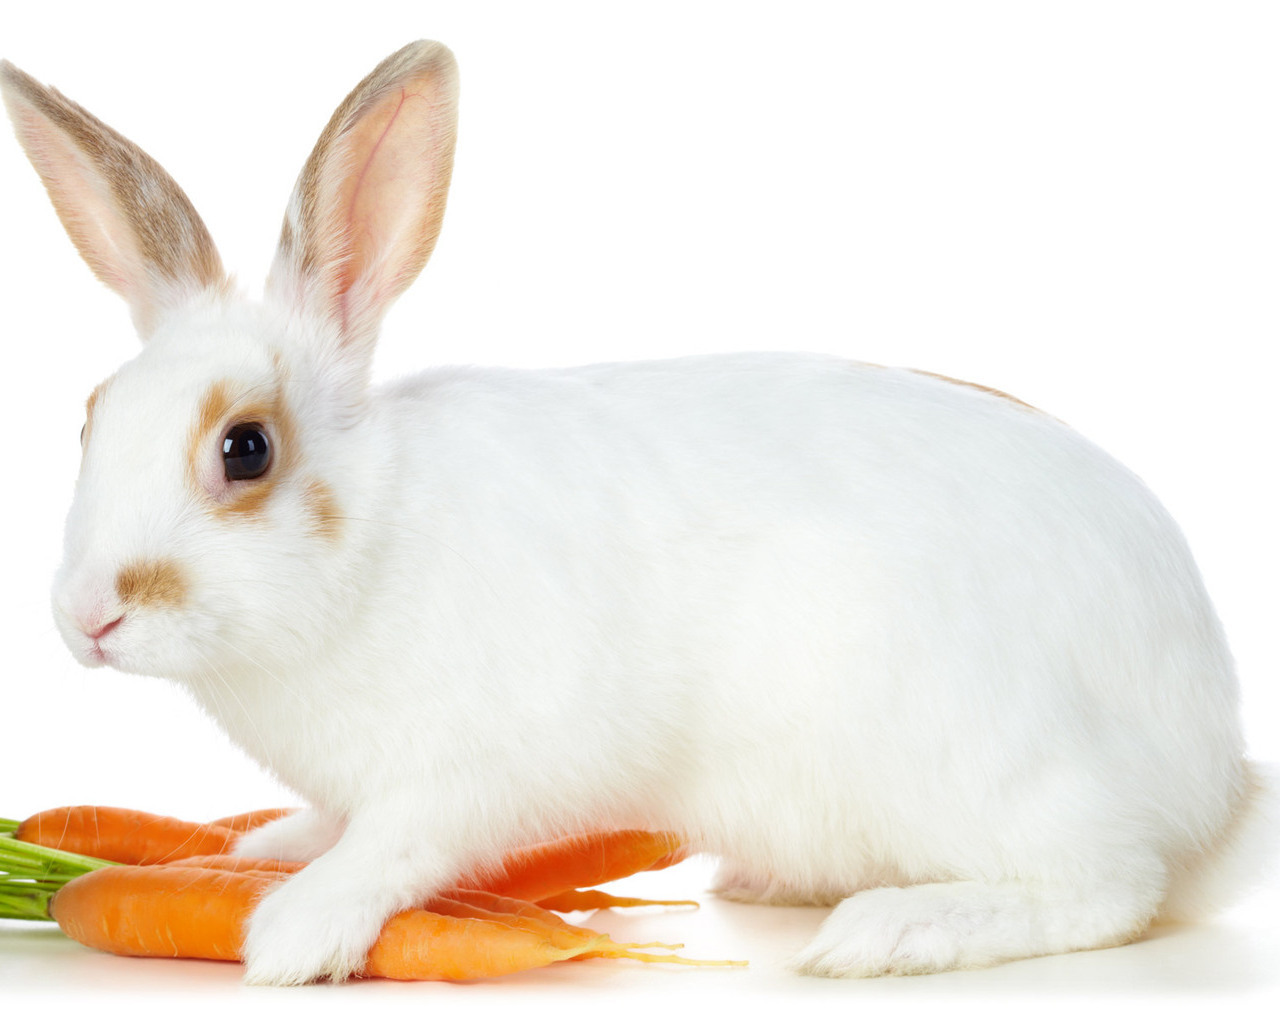 All About Animal Wildlife Cute White Rabbit HD Wallpaper